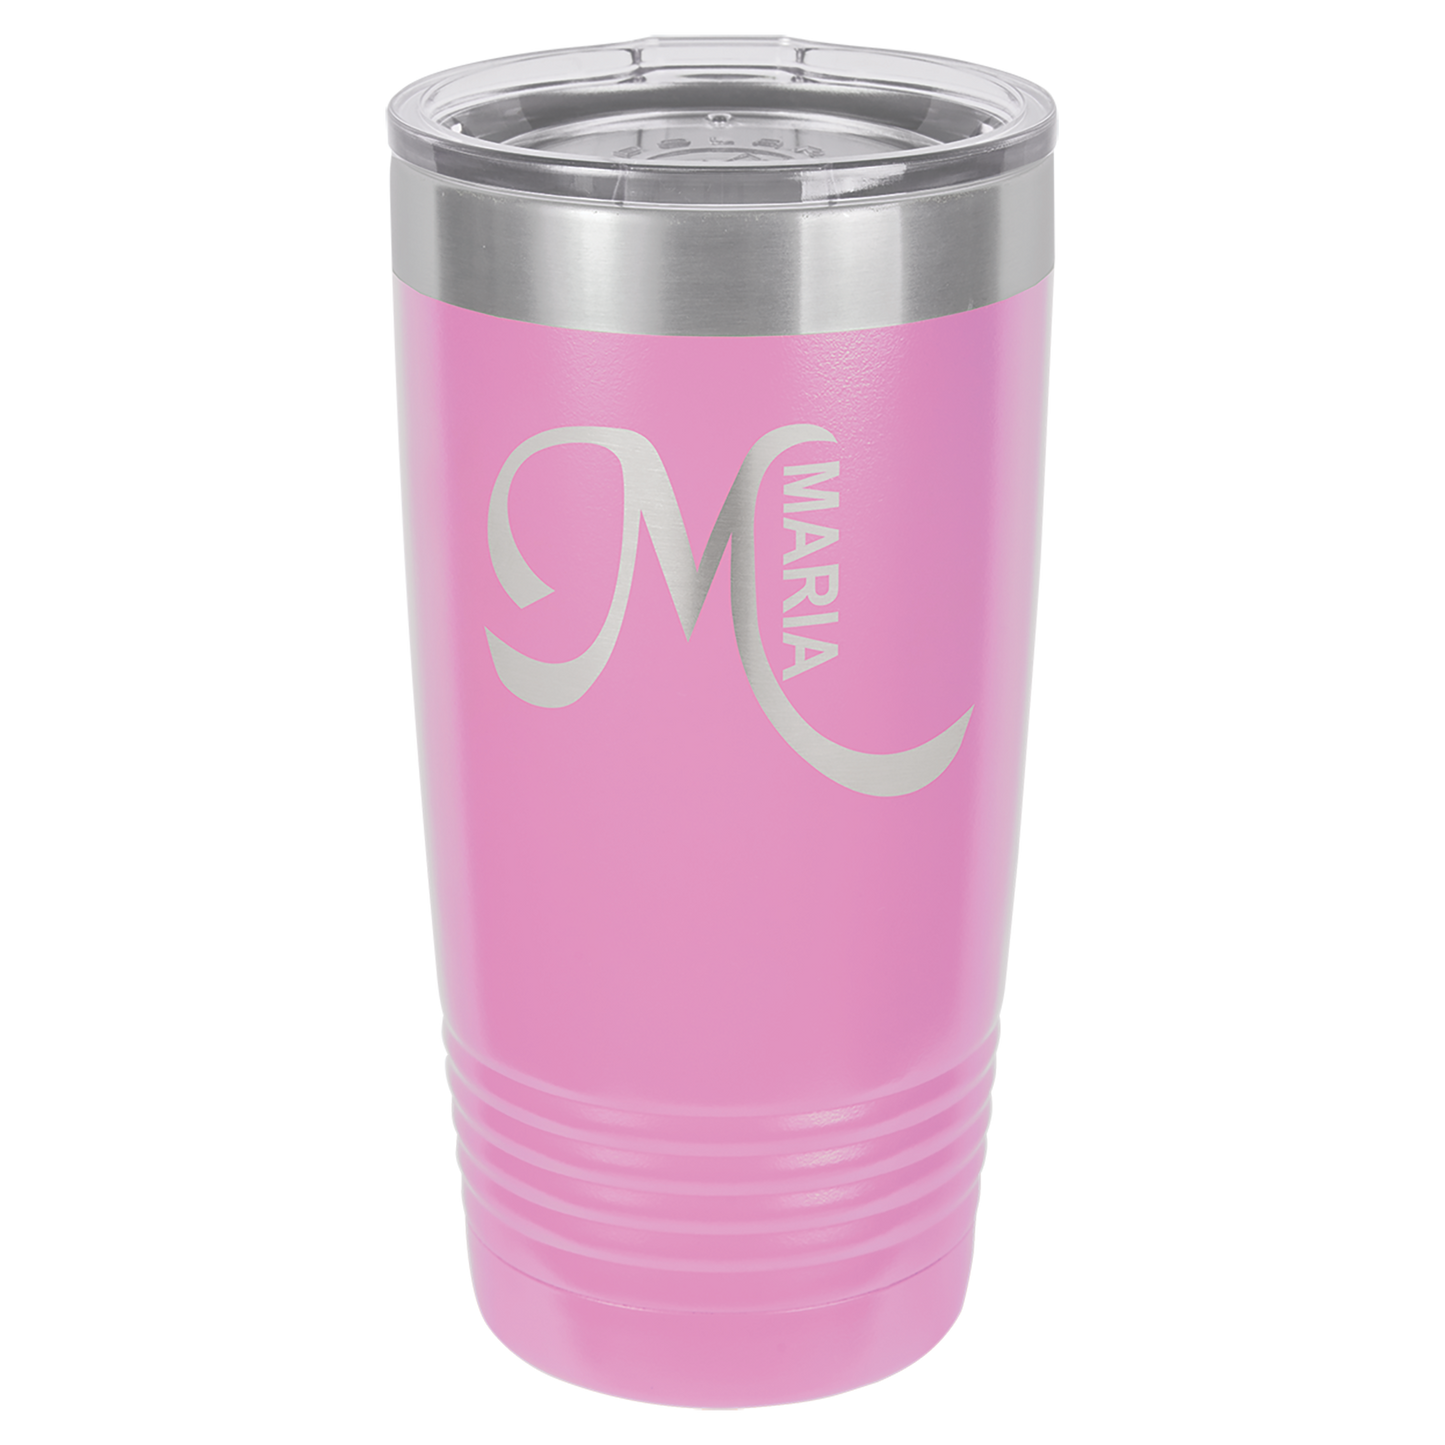 Hansey for Governor 20oz Ringneck Tumbler with Magnetic Lid